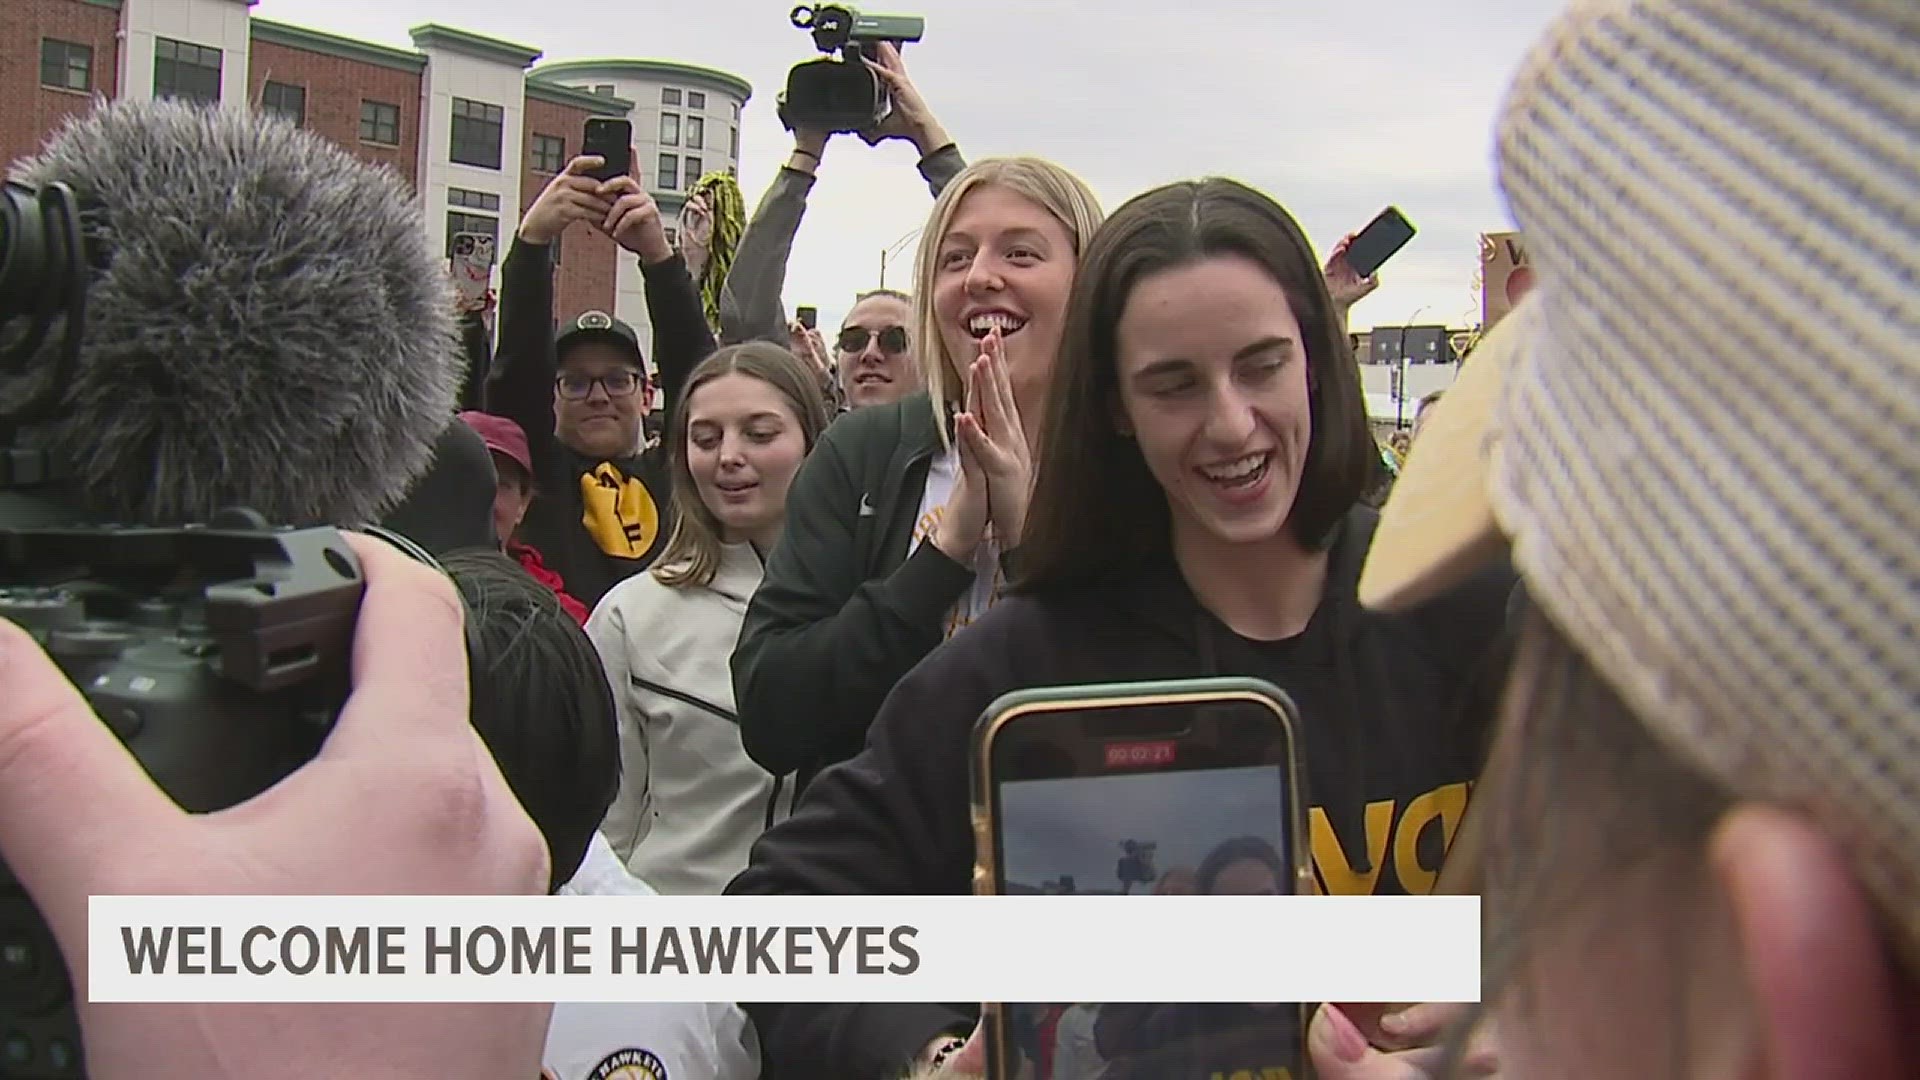 Hundreds of supporters crowded the streets of the Iowa River Landing, celebrating the return of the women's basketball team.